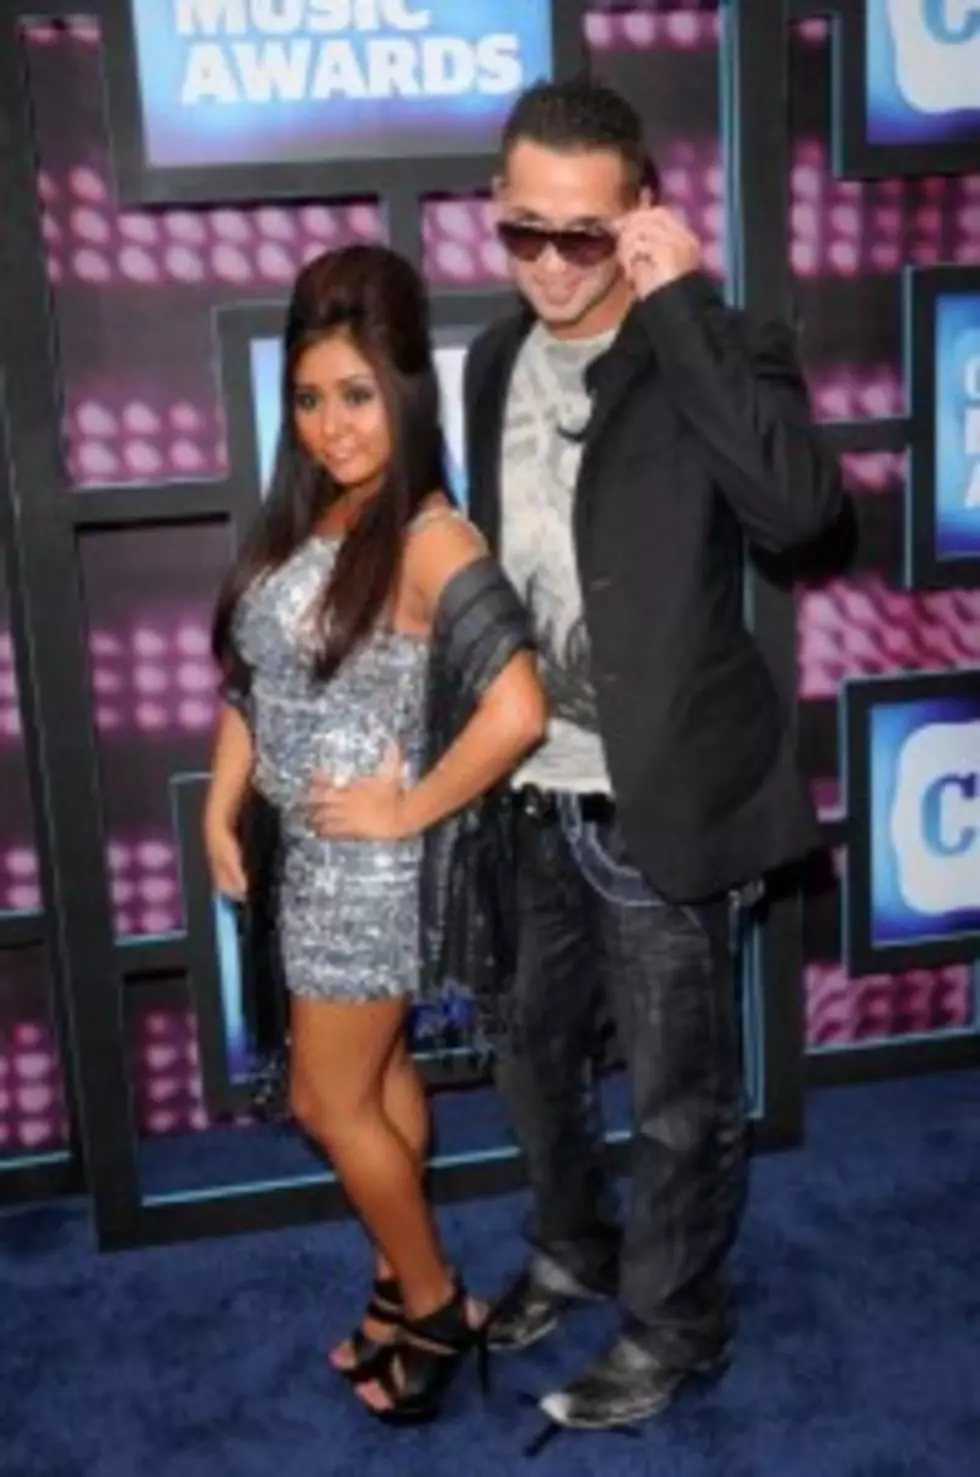 &#8220;Snooki&#8221; and &#8220;The Situation&#8221; Get Sober, So Are They Gone From the Jersey Shore?